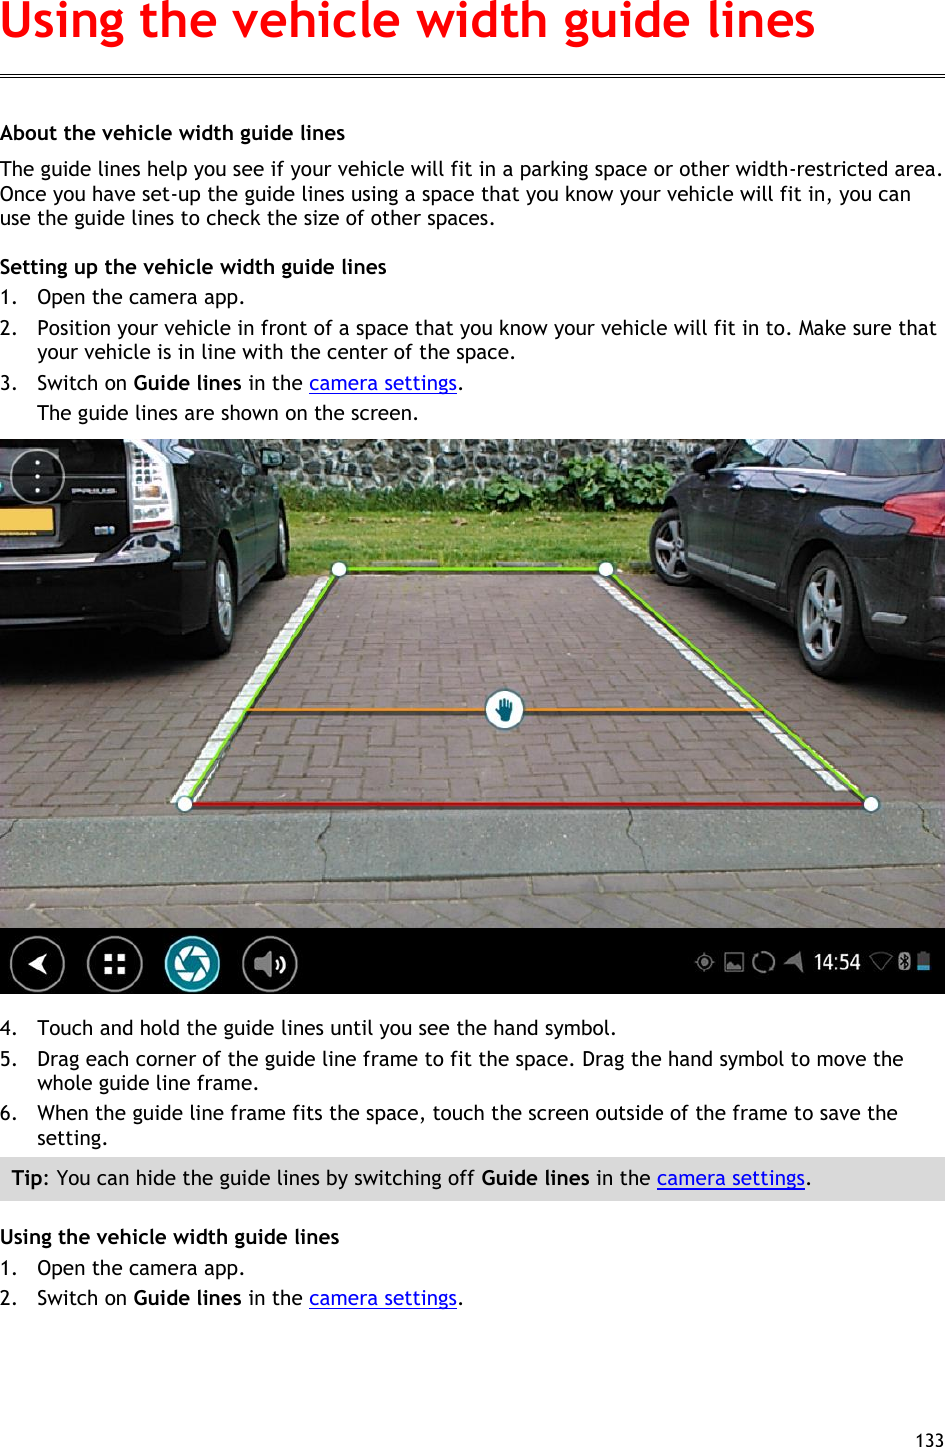  133  About the vehicle width guide lines The guide lines help you see if your vehicle will fit in a parking space or other width-restricted area. Once you have set-up the guide lines using a space that you know your vehicle will fit in, you can use the guide lines to check the size of other spaces. Setting up the vehicle width guide lines 1. Open the camera app. 2. Position your vehicle in front of a space that you know your vehicle will fit in to. Make sure that your vehicle is in line with the center of the space. 3. Switch on Guide lines in the camera settings. The guide lines are shown on the screen.  4. Touch and hold the guide lines until you see the hand symbol. 5. Drag each corner of the guide line frame to fit the space. Drag the hand symbol to move the whole guide line frame. 6. When the guide line frame fits the space, touch the screen outside of the frame to save the setting. Tip: You can hide the guide lines by switching off Guide lines in the camera settings. Using the vehicle width guide lines 1. Open the camera app. 2. Switch on Guide lines in the camera settings. Using the vehicle width guide lines 